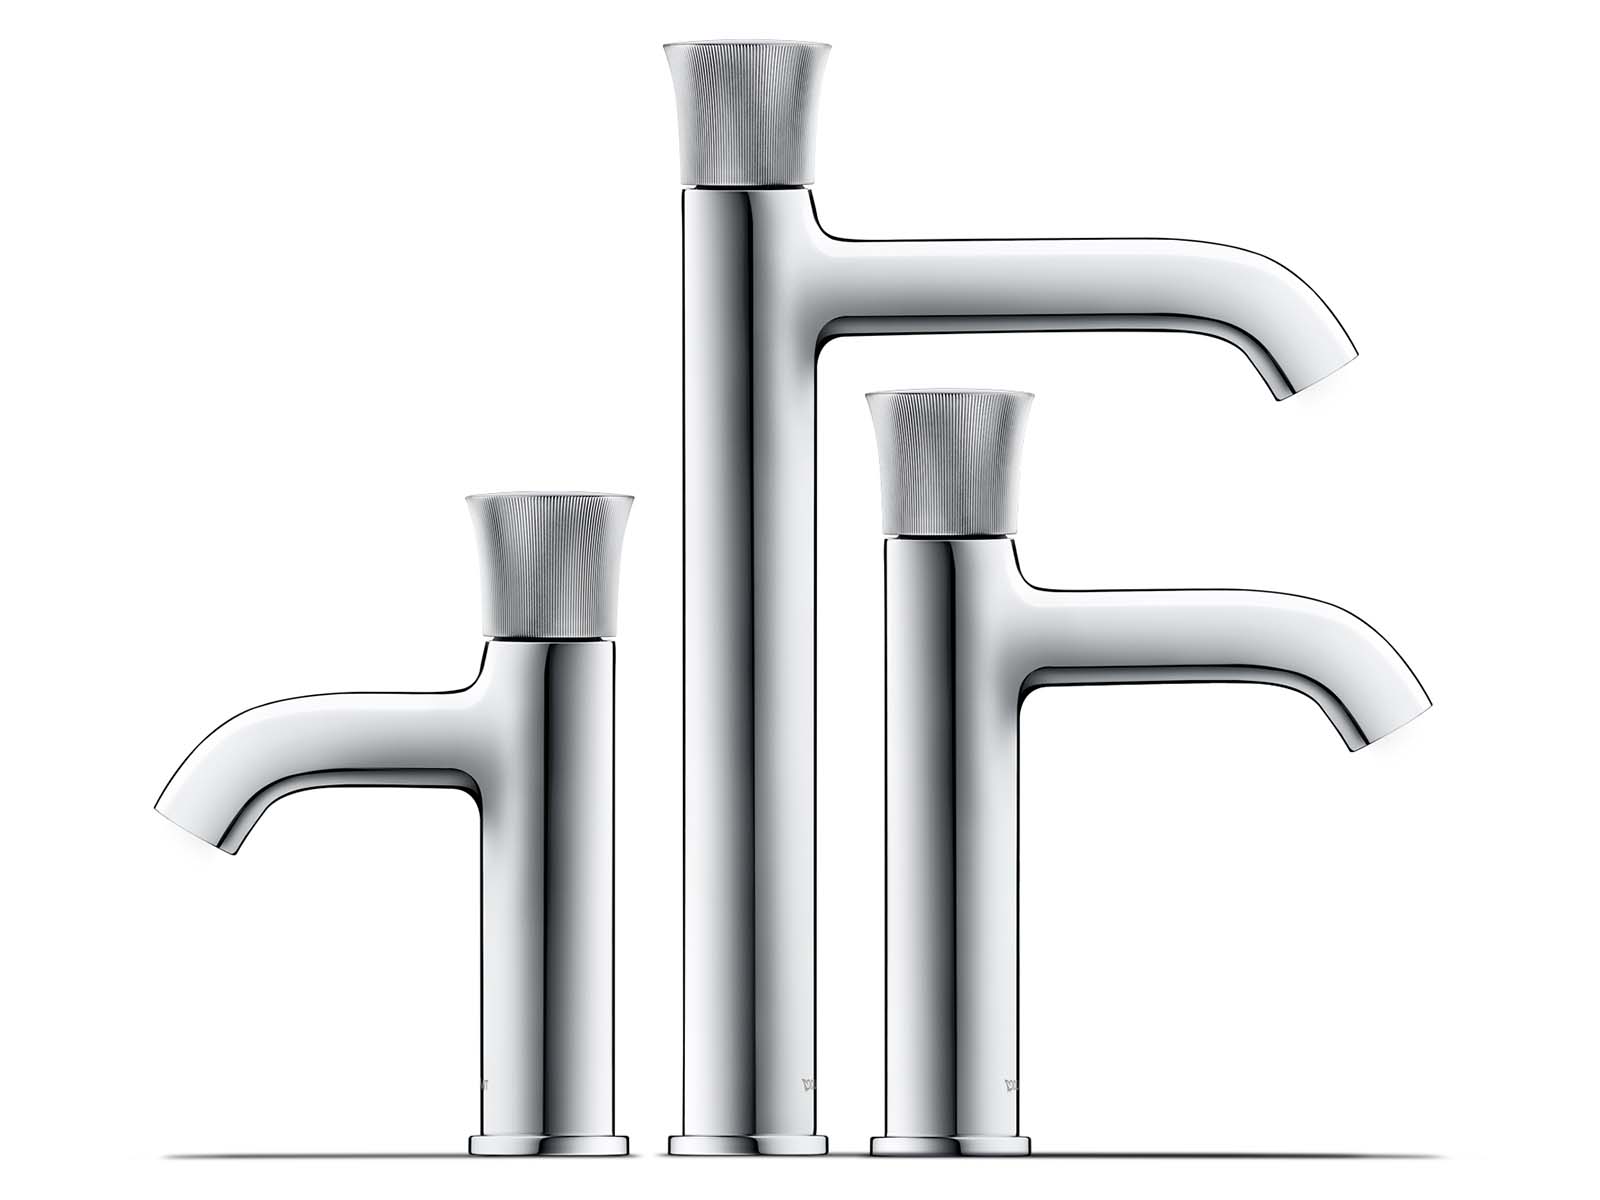 White Tulip design by Philippe Starck for Duravit.